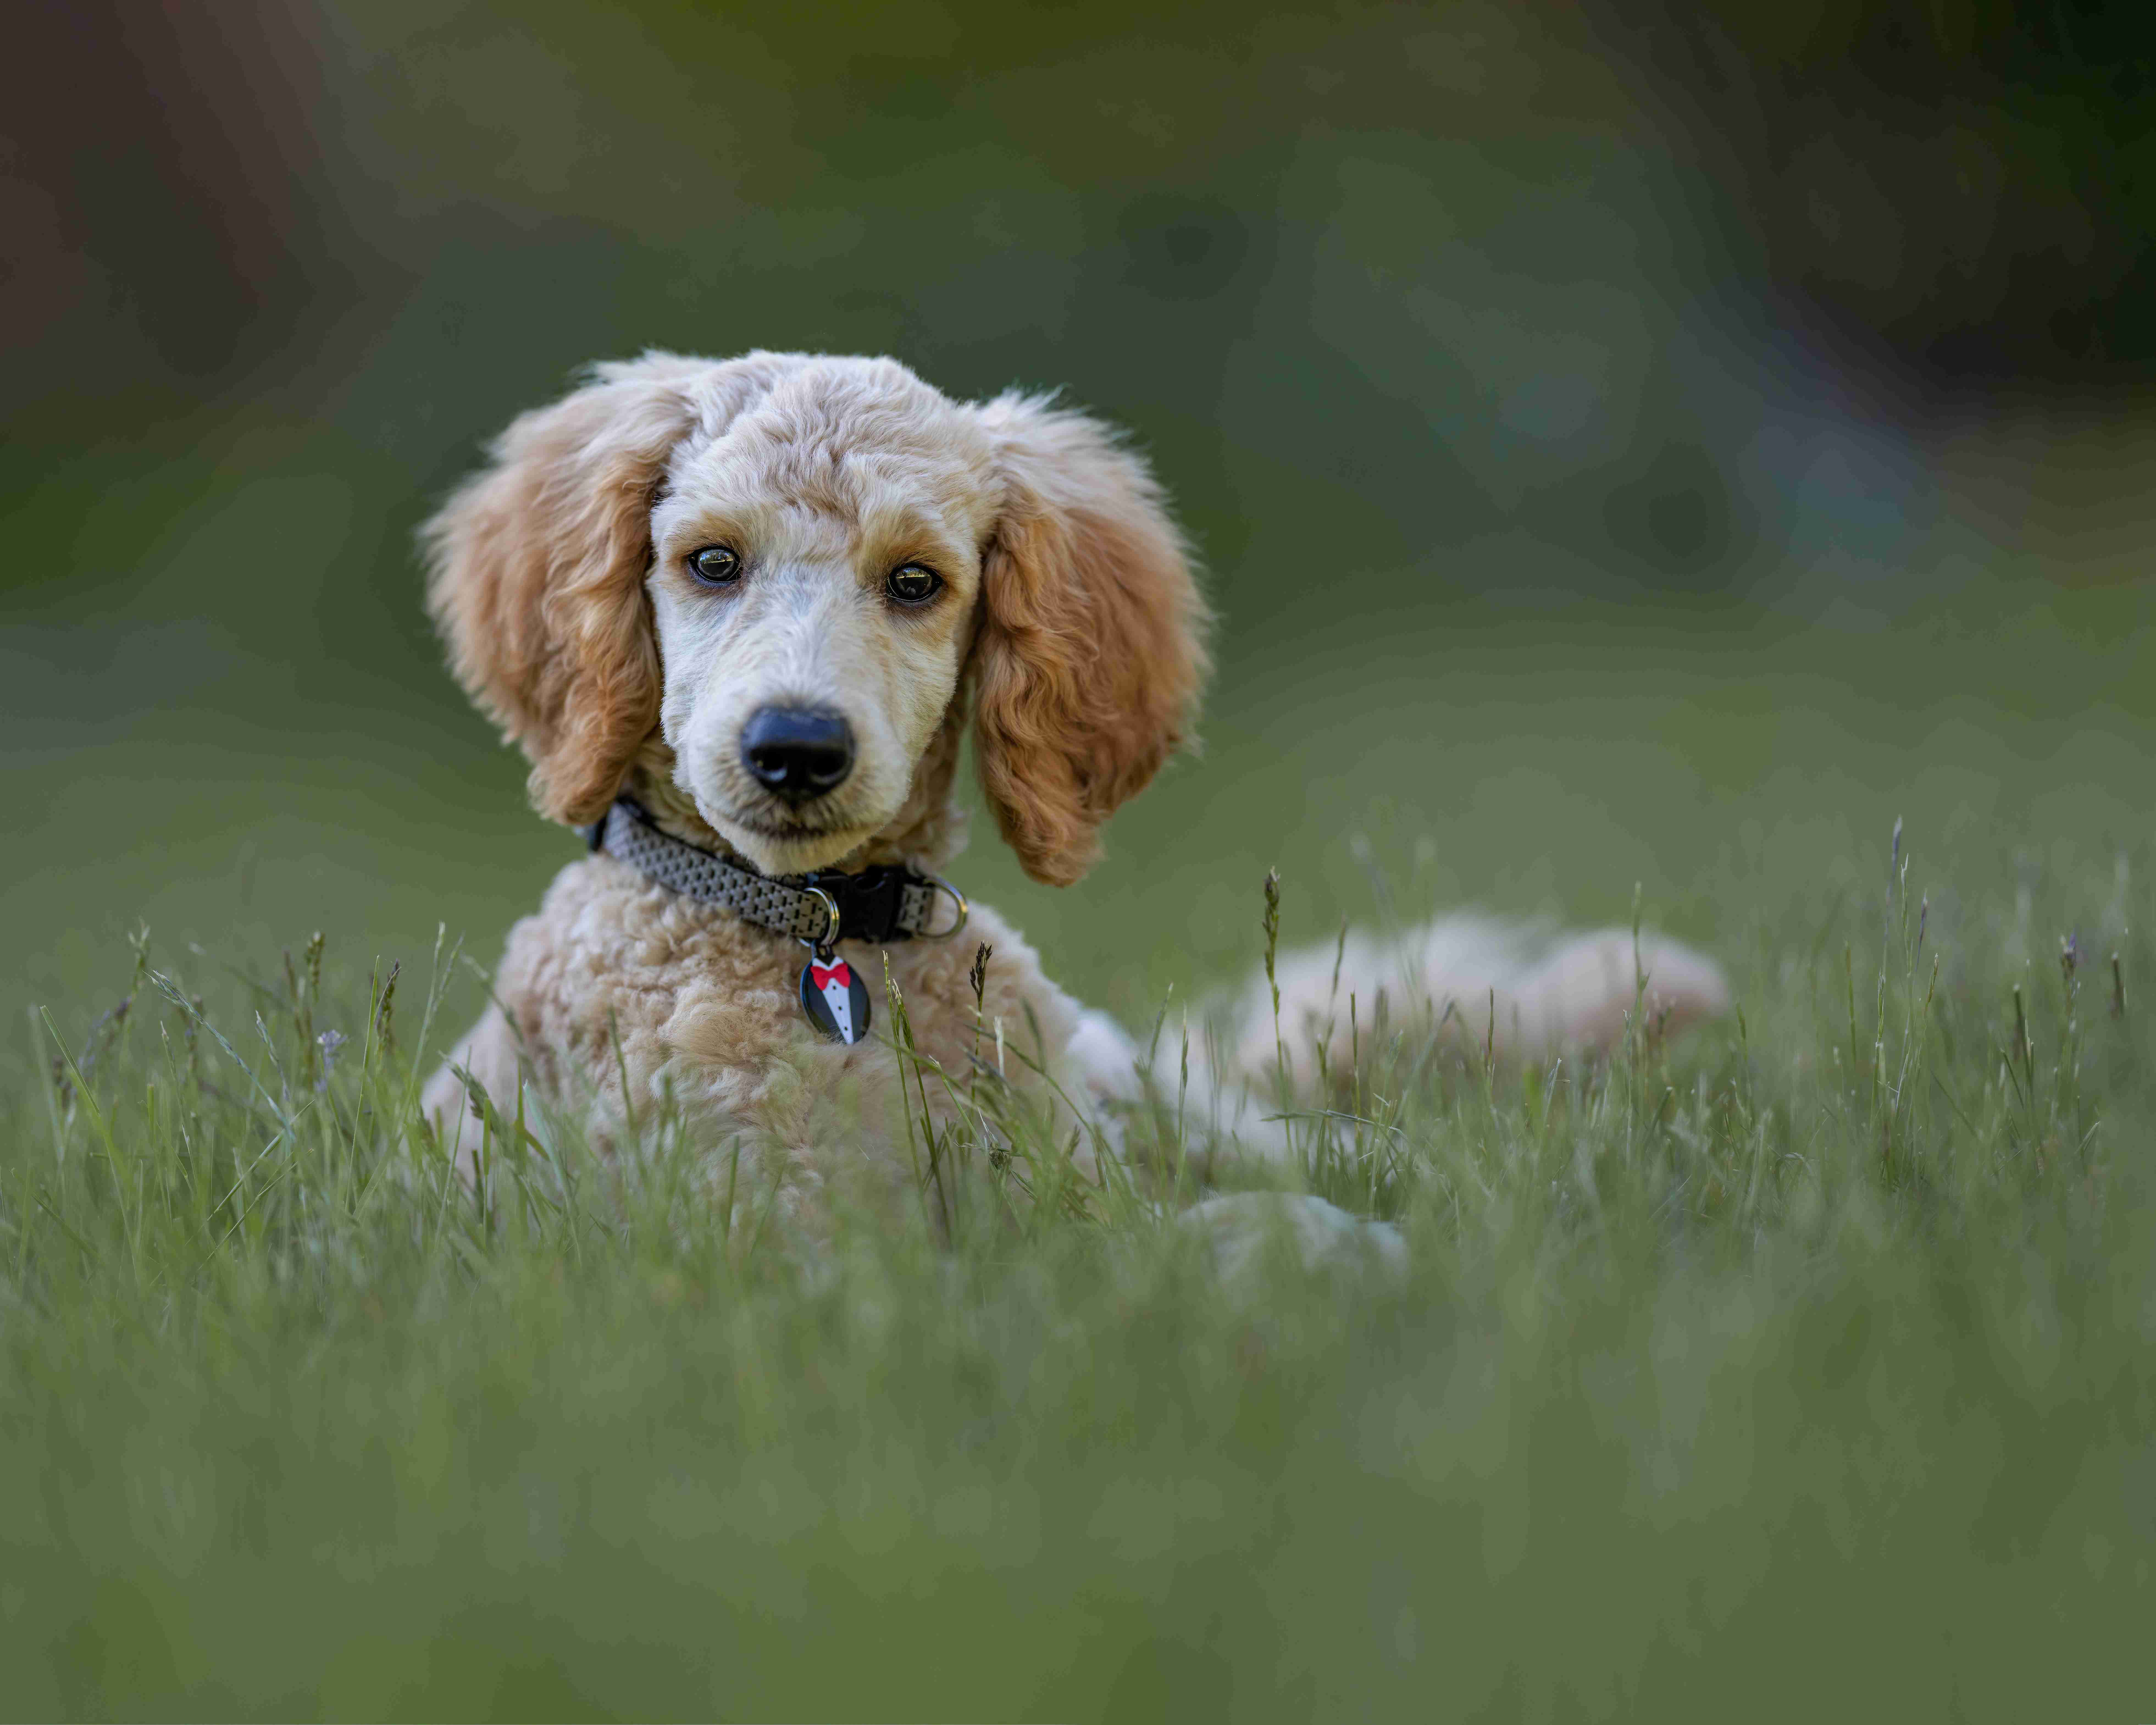 Do Poodles commonly suffer from urinary incontinence? How can this condition be managed?